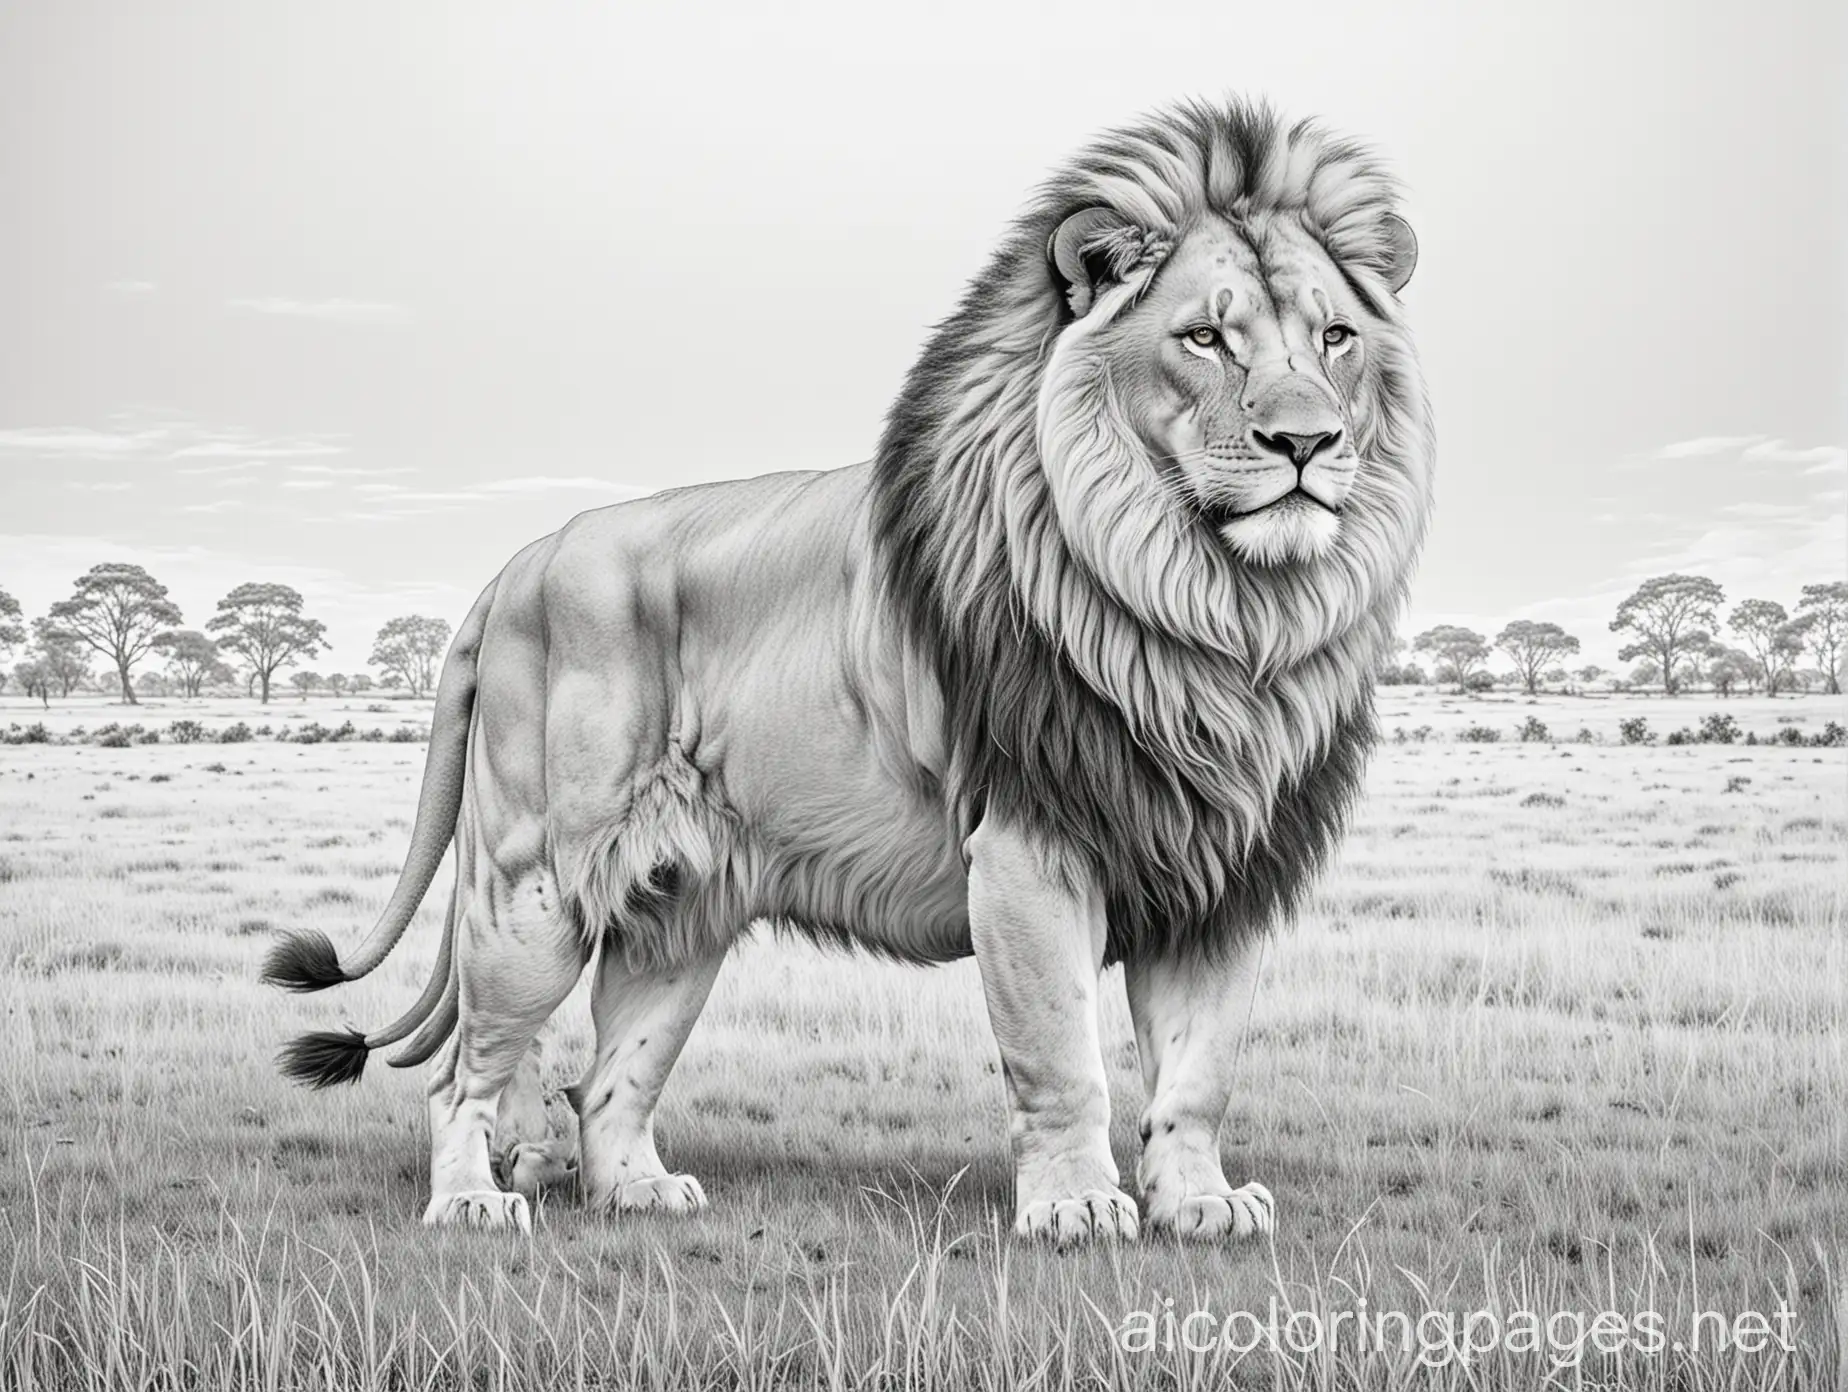 a big lion, full body, in a field, coloring page, Coloring Page, black and white, line art, white background, Simplicity, Ample White Space. The background of the coloring page is plain white to make it easy for young children to color within the lines. The outlines of all the subjects are easy to distinguish, making it simple for kids to color without too much difficulty